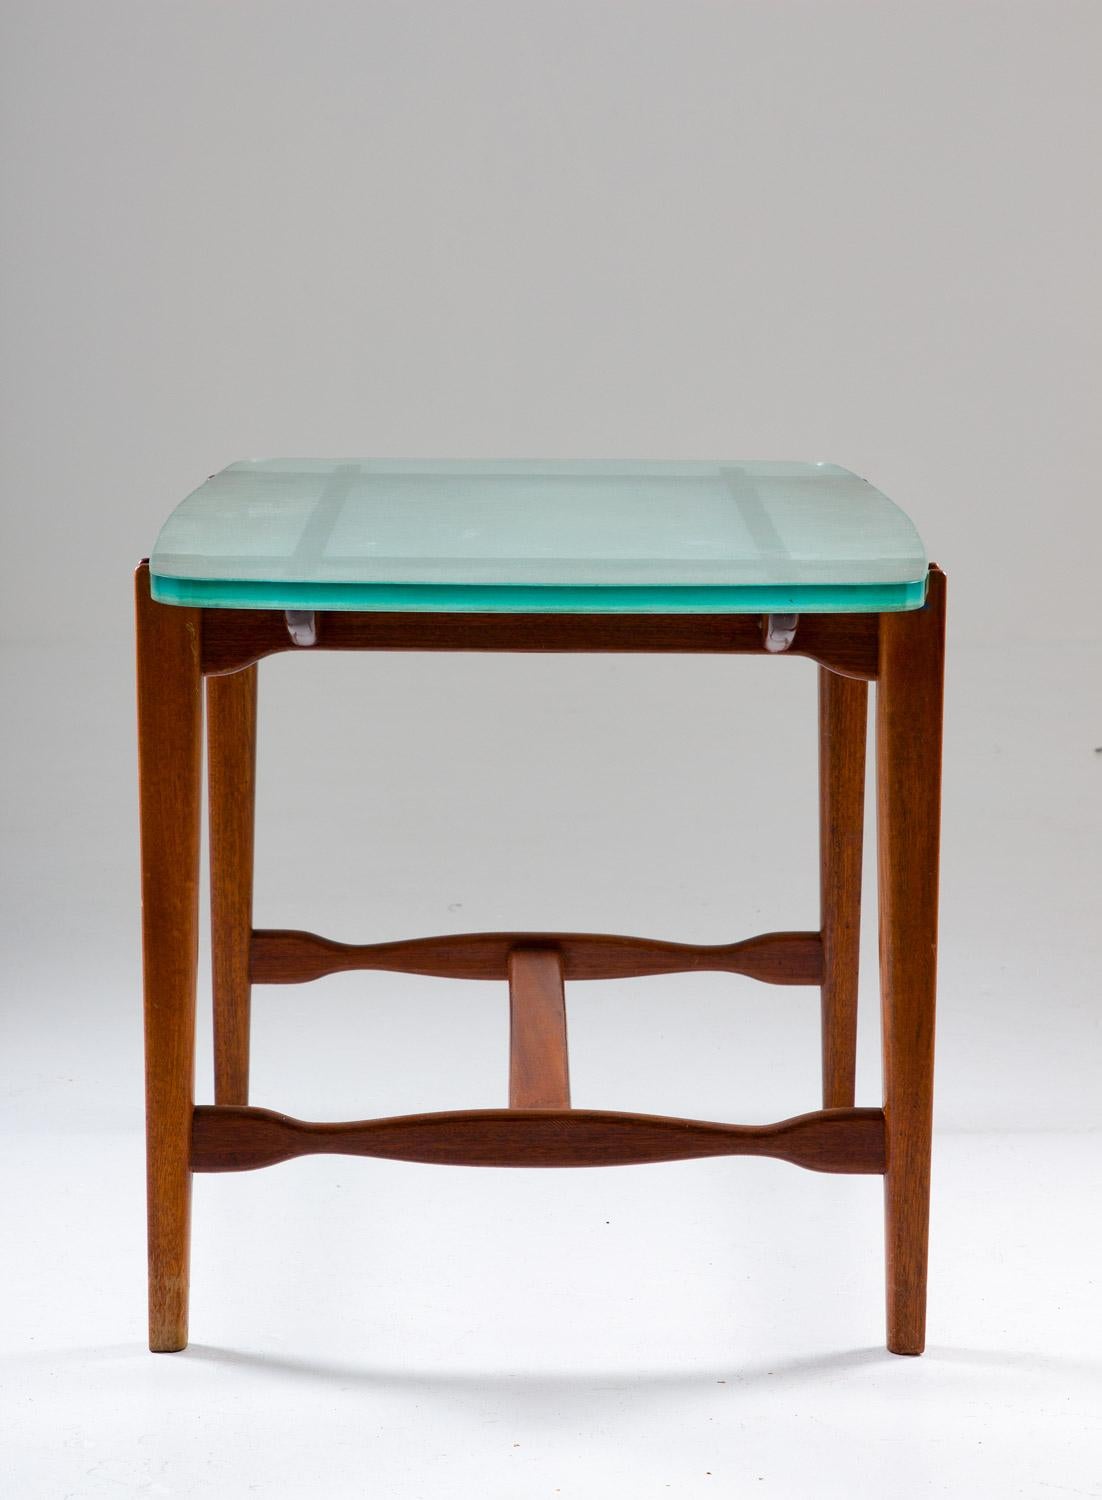 Swedish Modern Coffee Table in Mahogany and Glass, 1940s For Sale 1